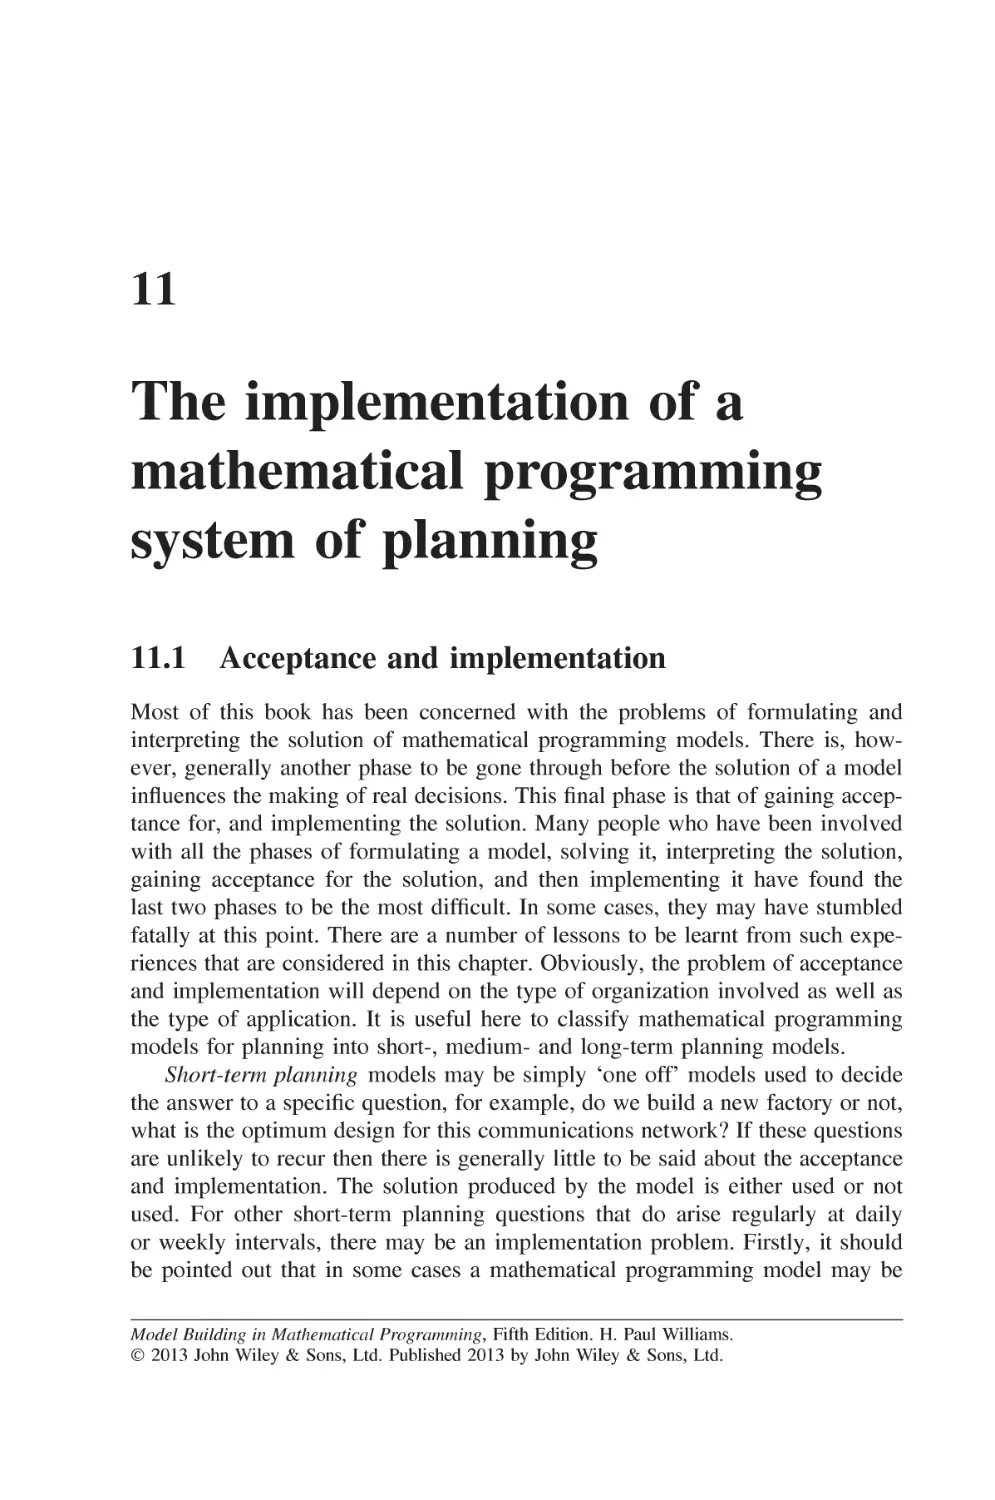 Chapter 11 The implementation of a mathematical programming system of planning